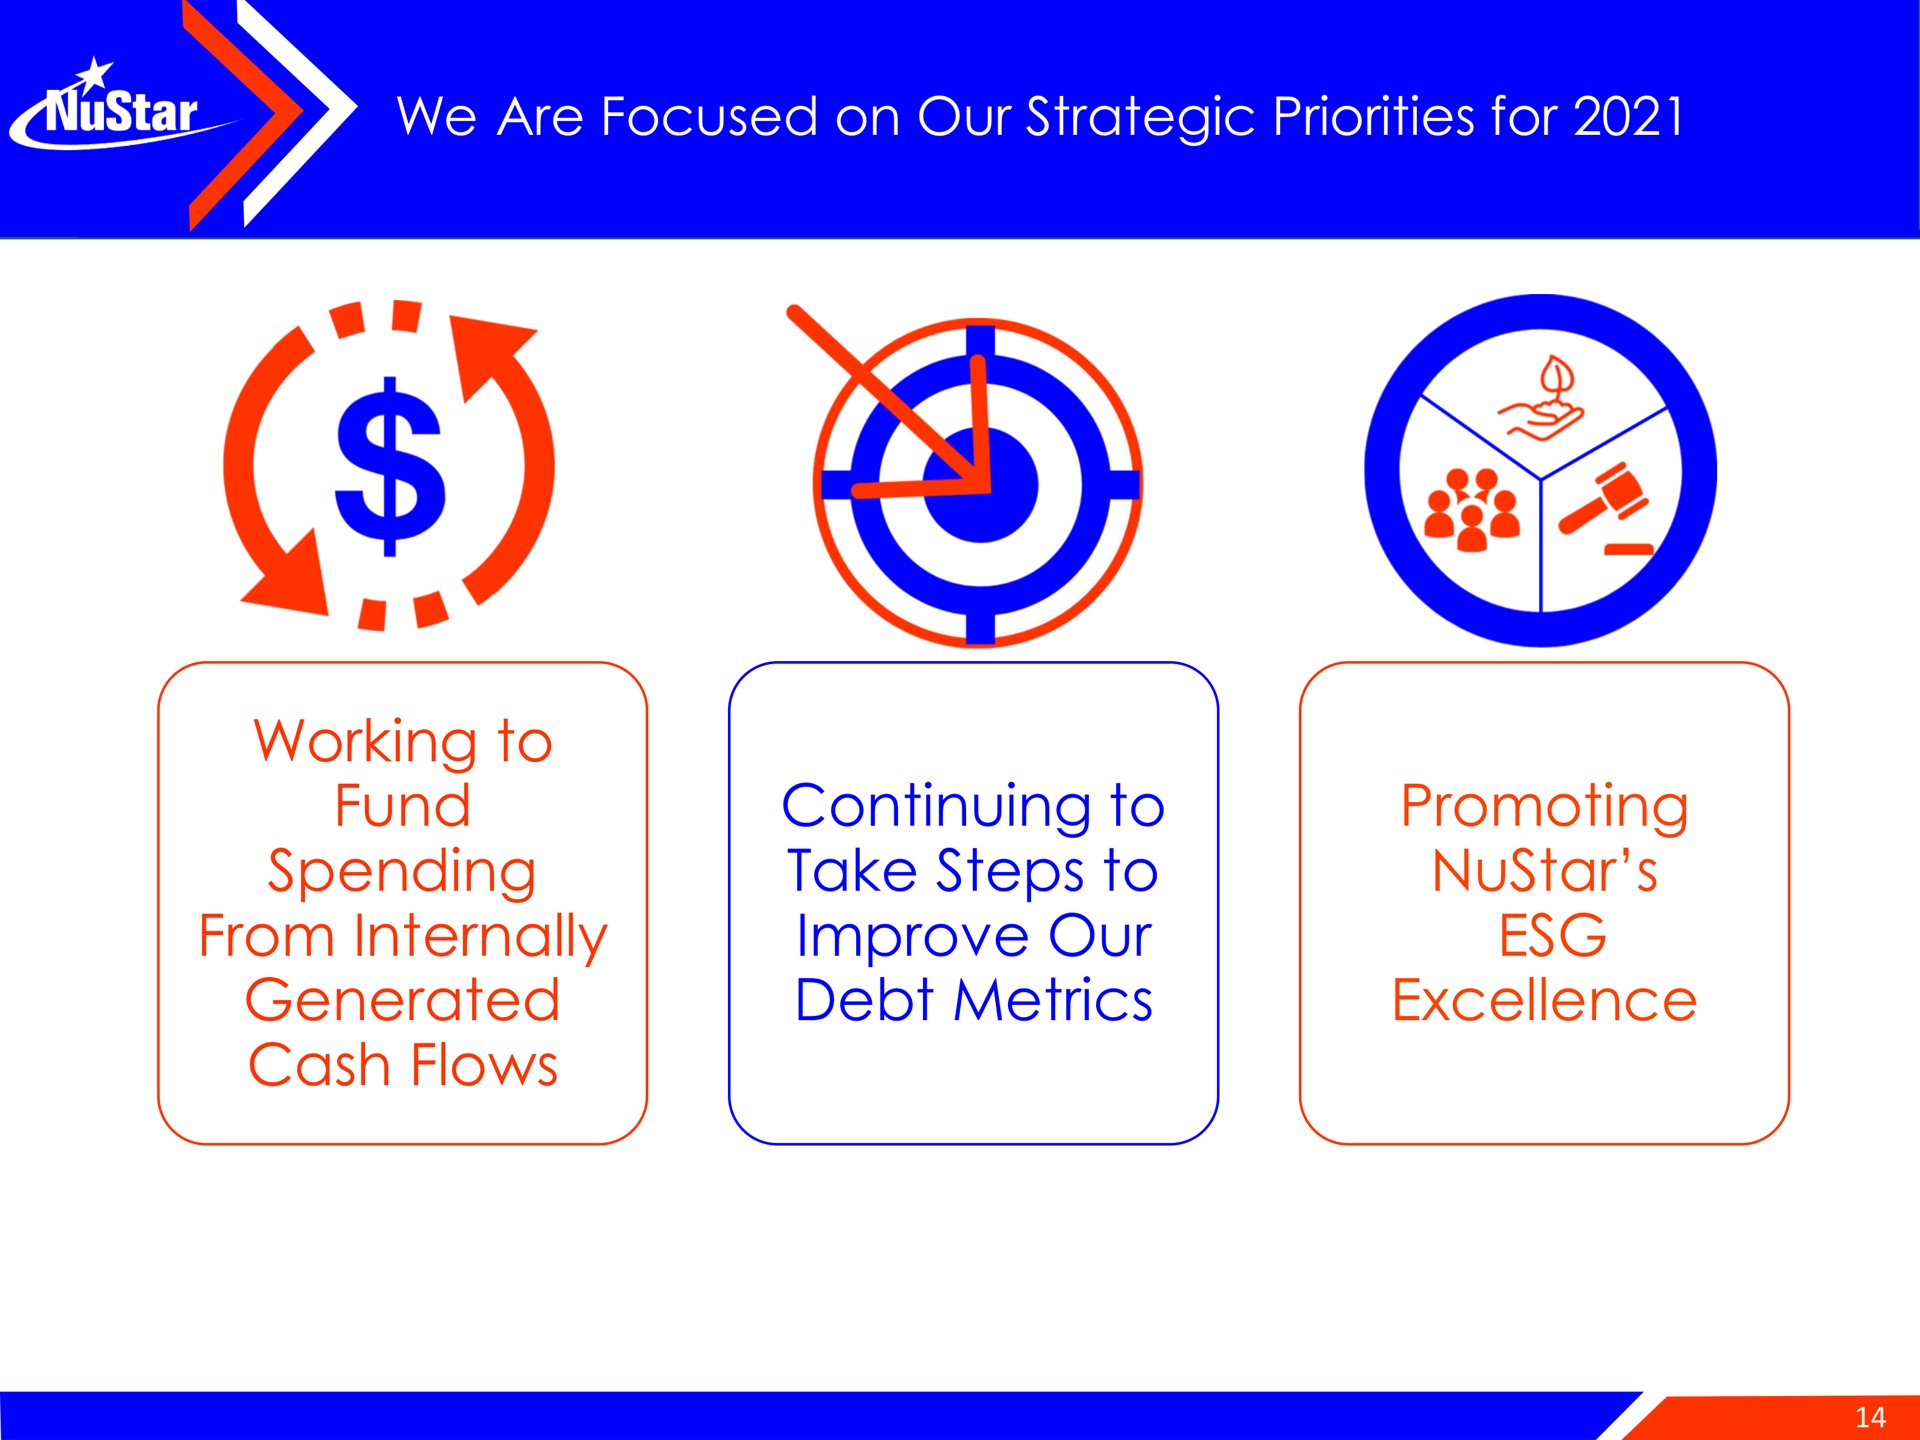 we are focused on our strategic priorities for working to fund spending from internally generated cash flows continuing to take steps to improve our debt metrics promoting excellence | NuStar Energy